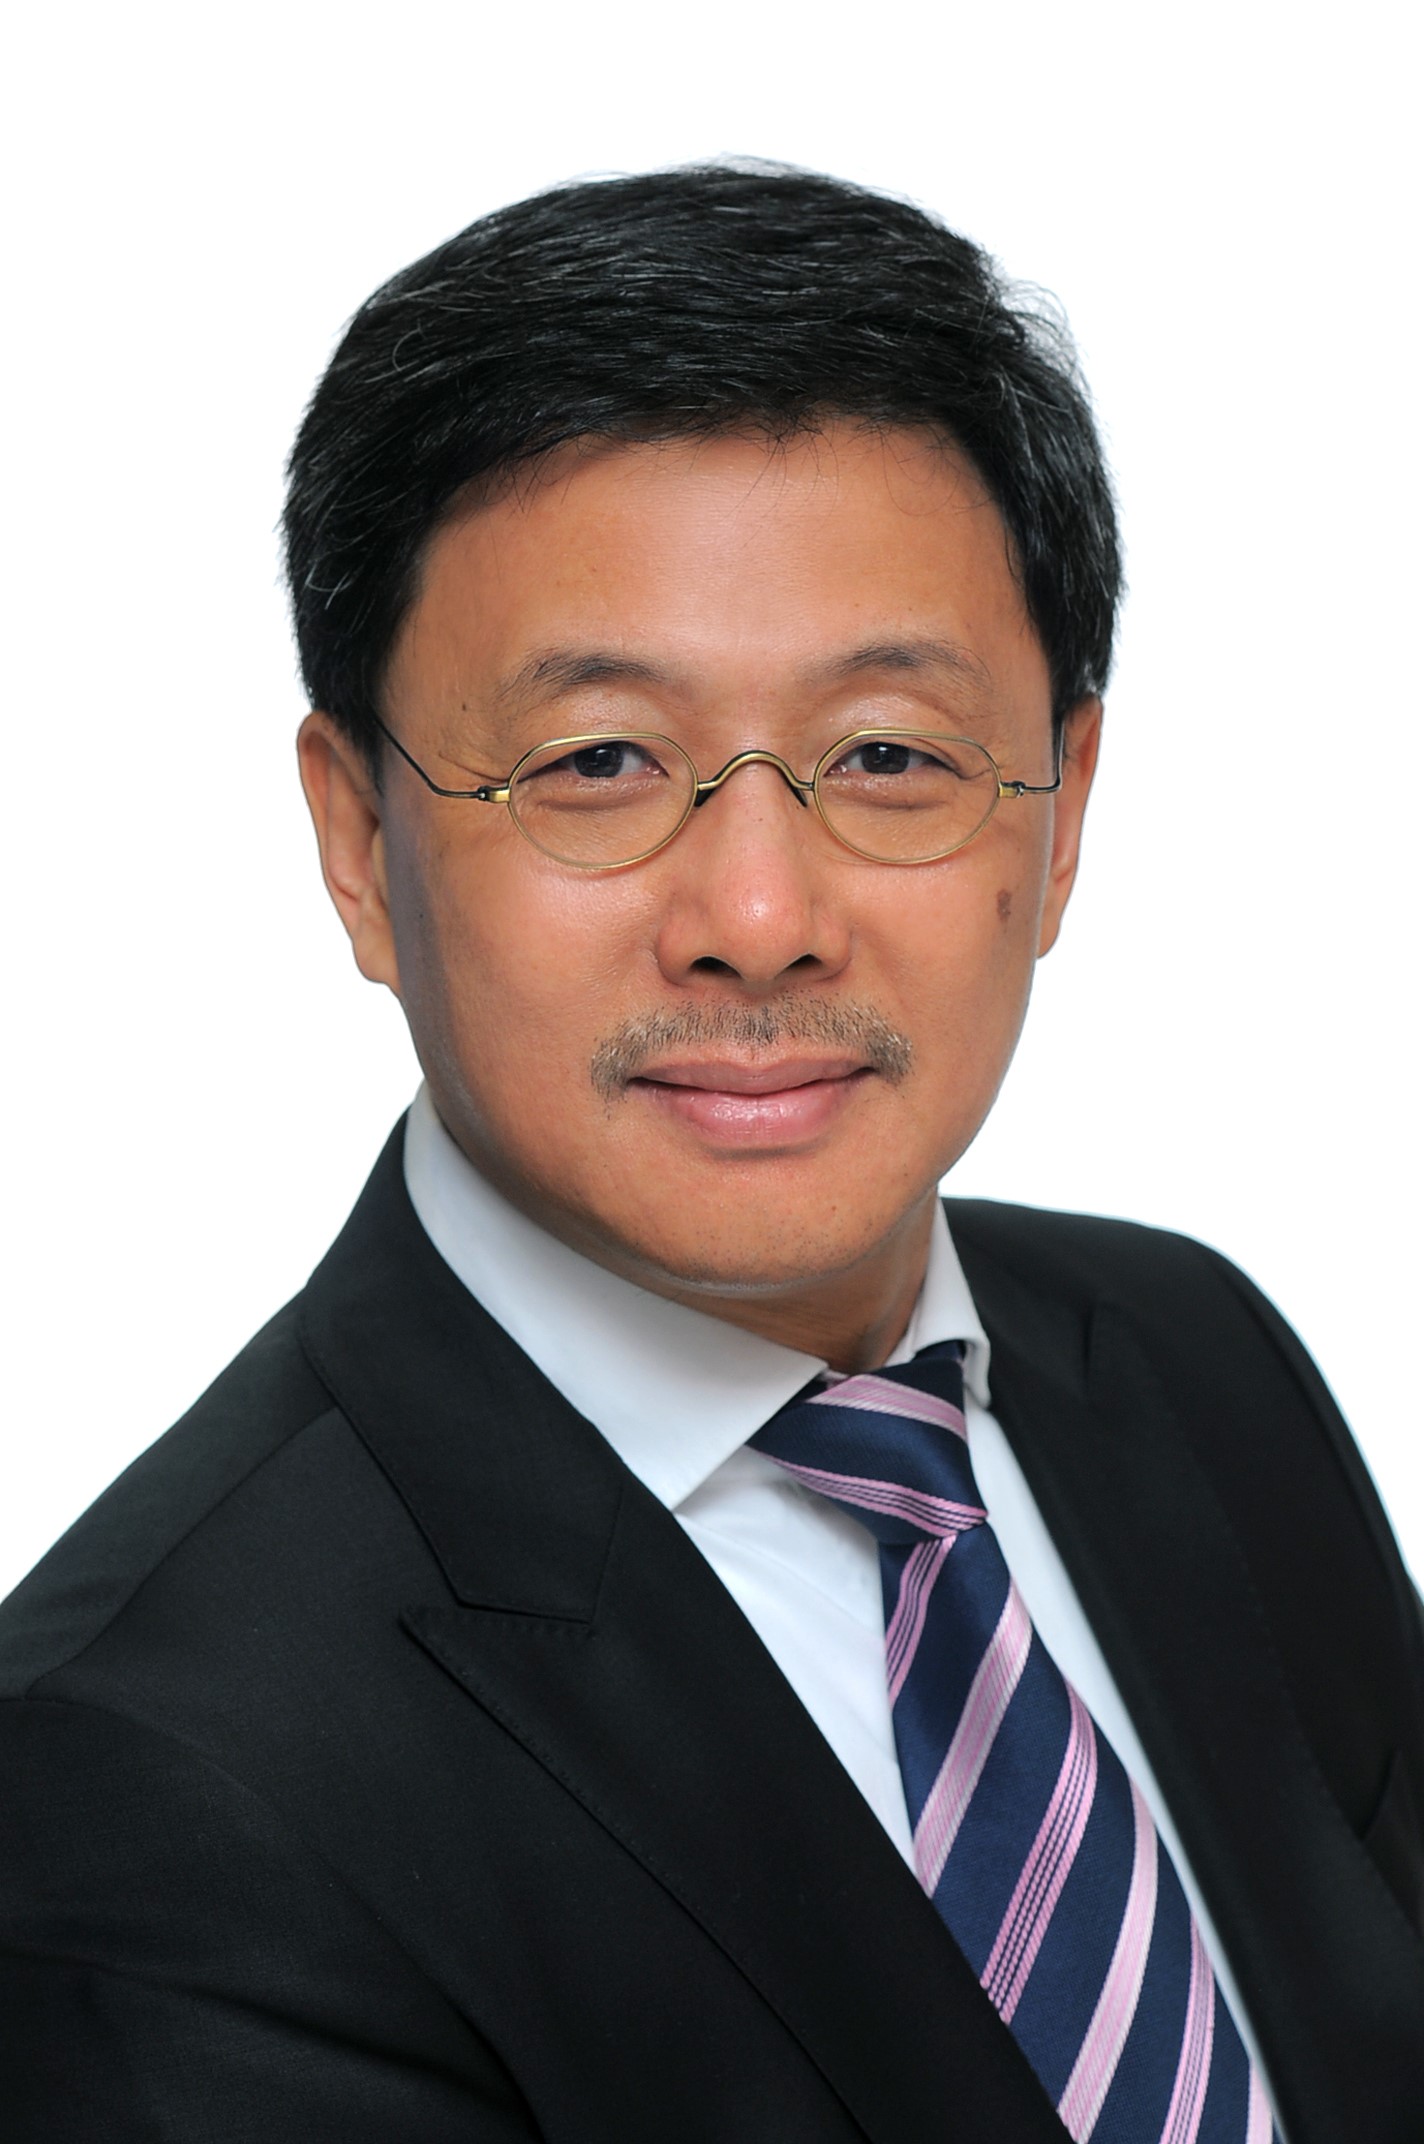 Prof. Dr. Naiming Wei